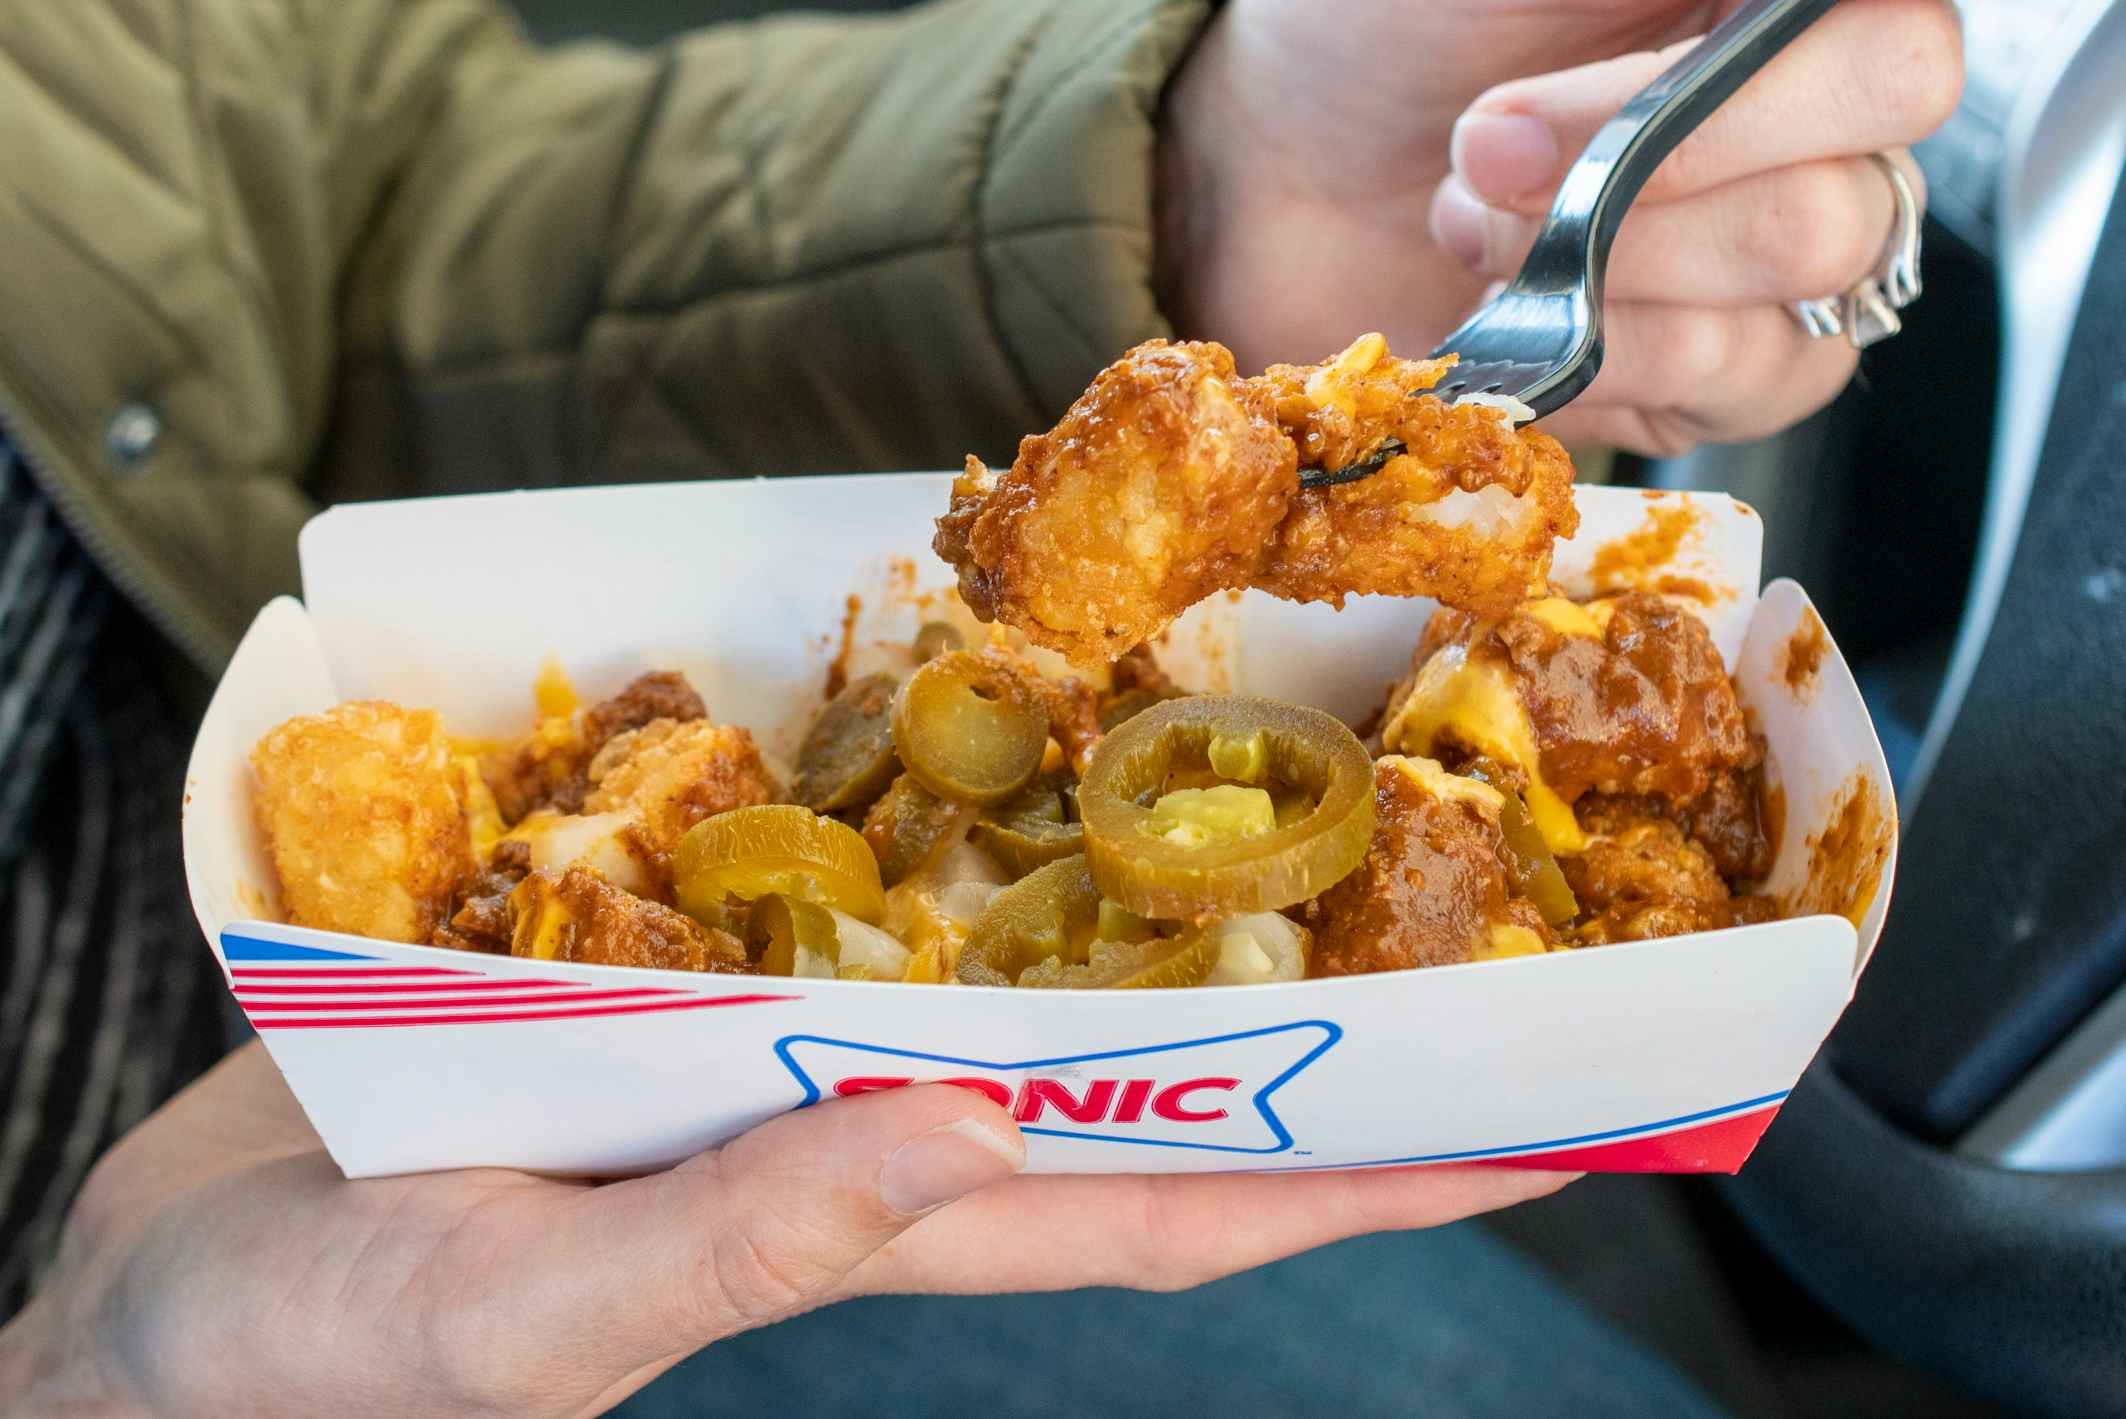 A person scooping a bite full of Sonic loaded tots from a cardboard fast food dish.